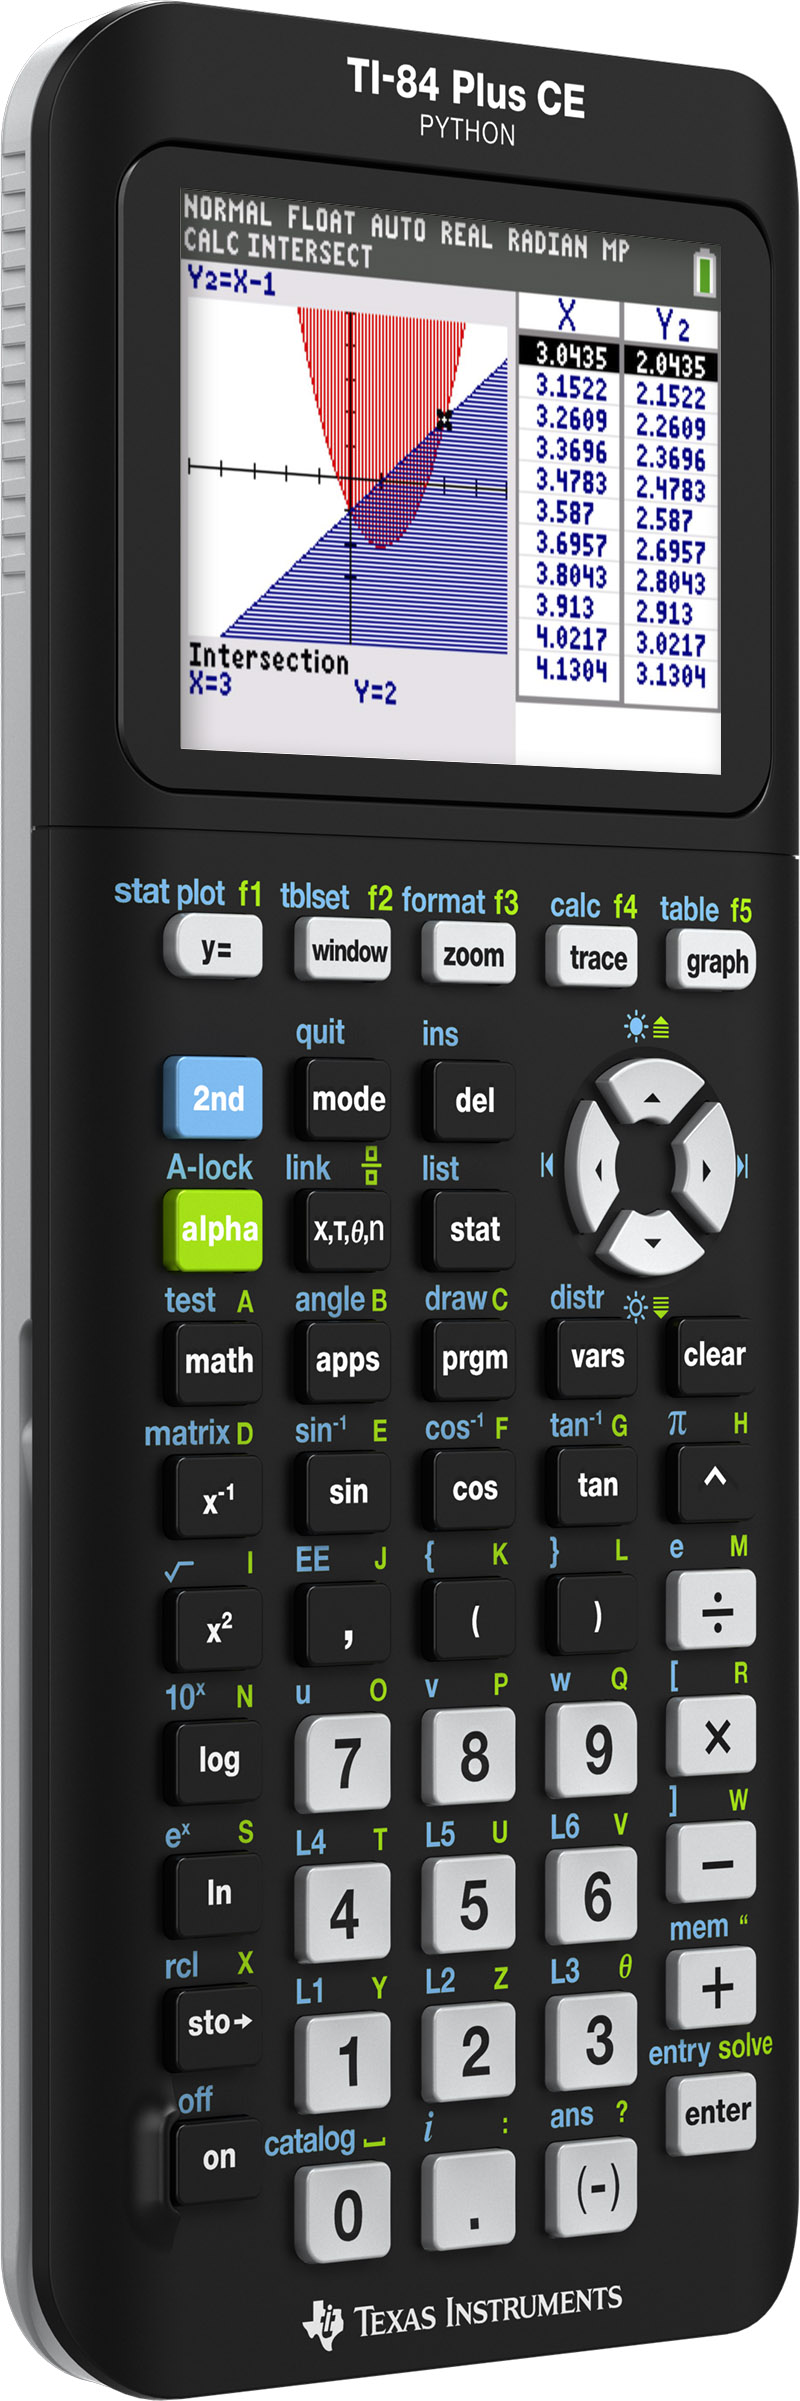 Texas Instruments TI-84 Plus CE Graphing Calculator High School and College, Black - image 2 of 5